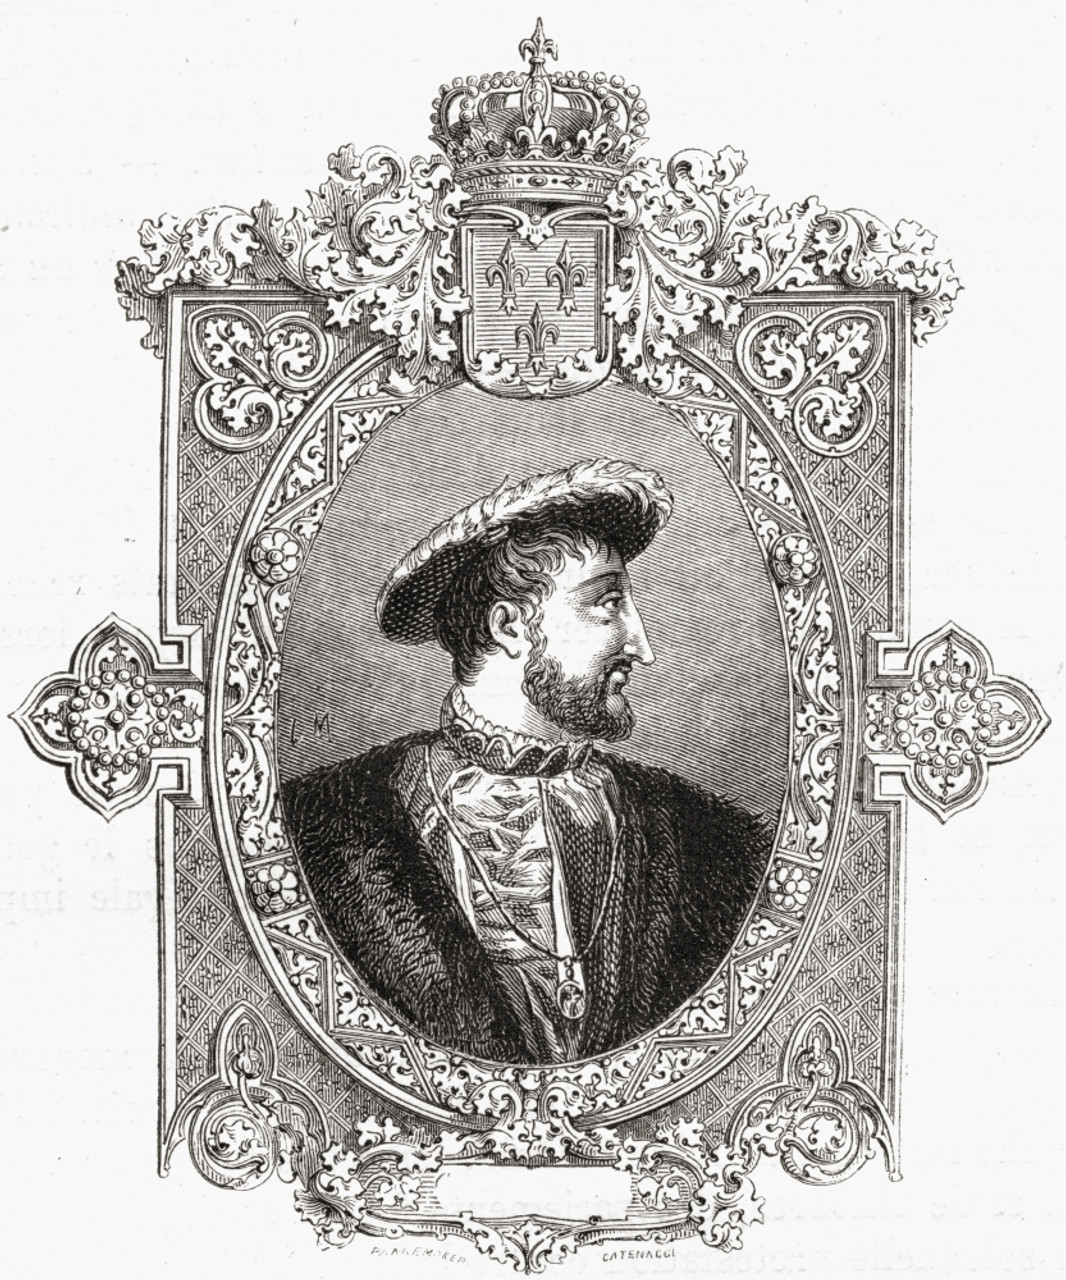 Francis the first, King of France